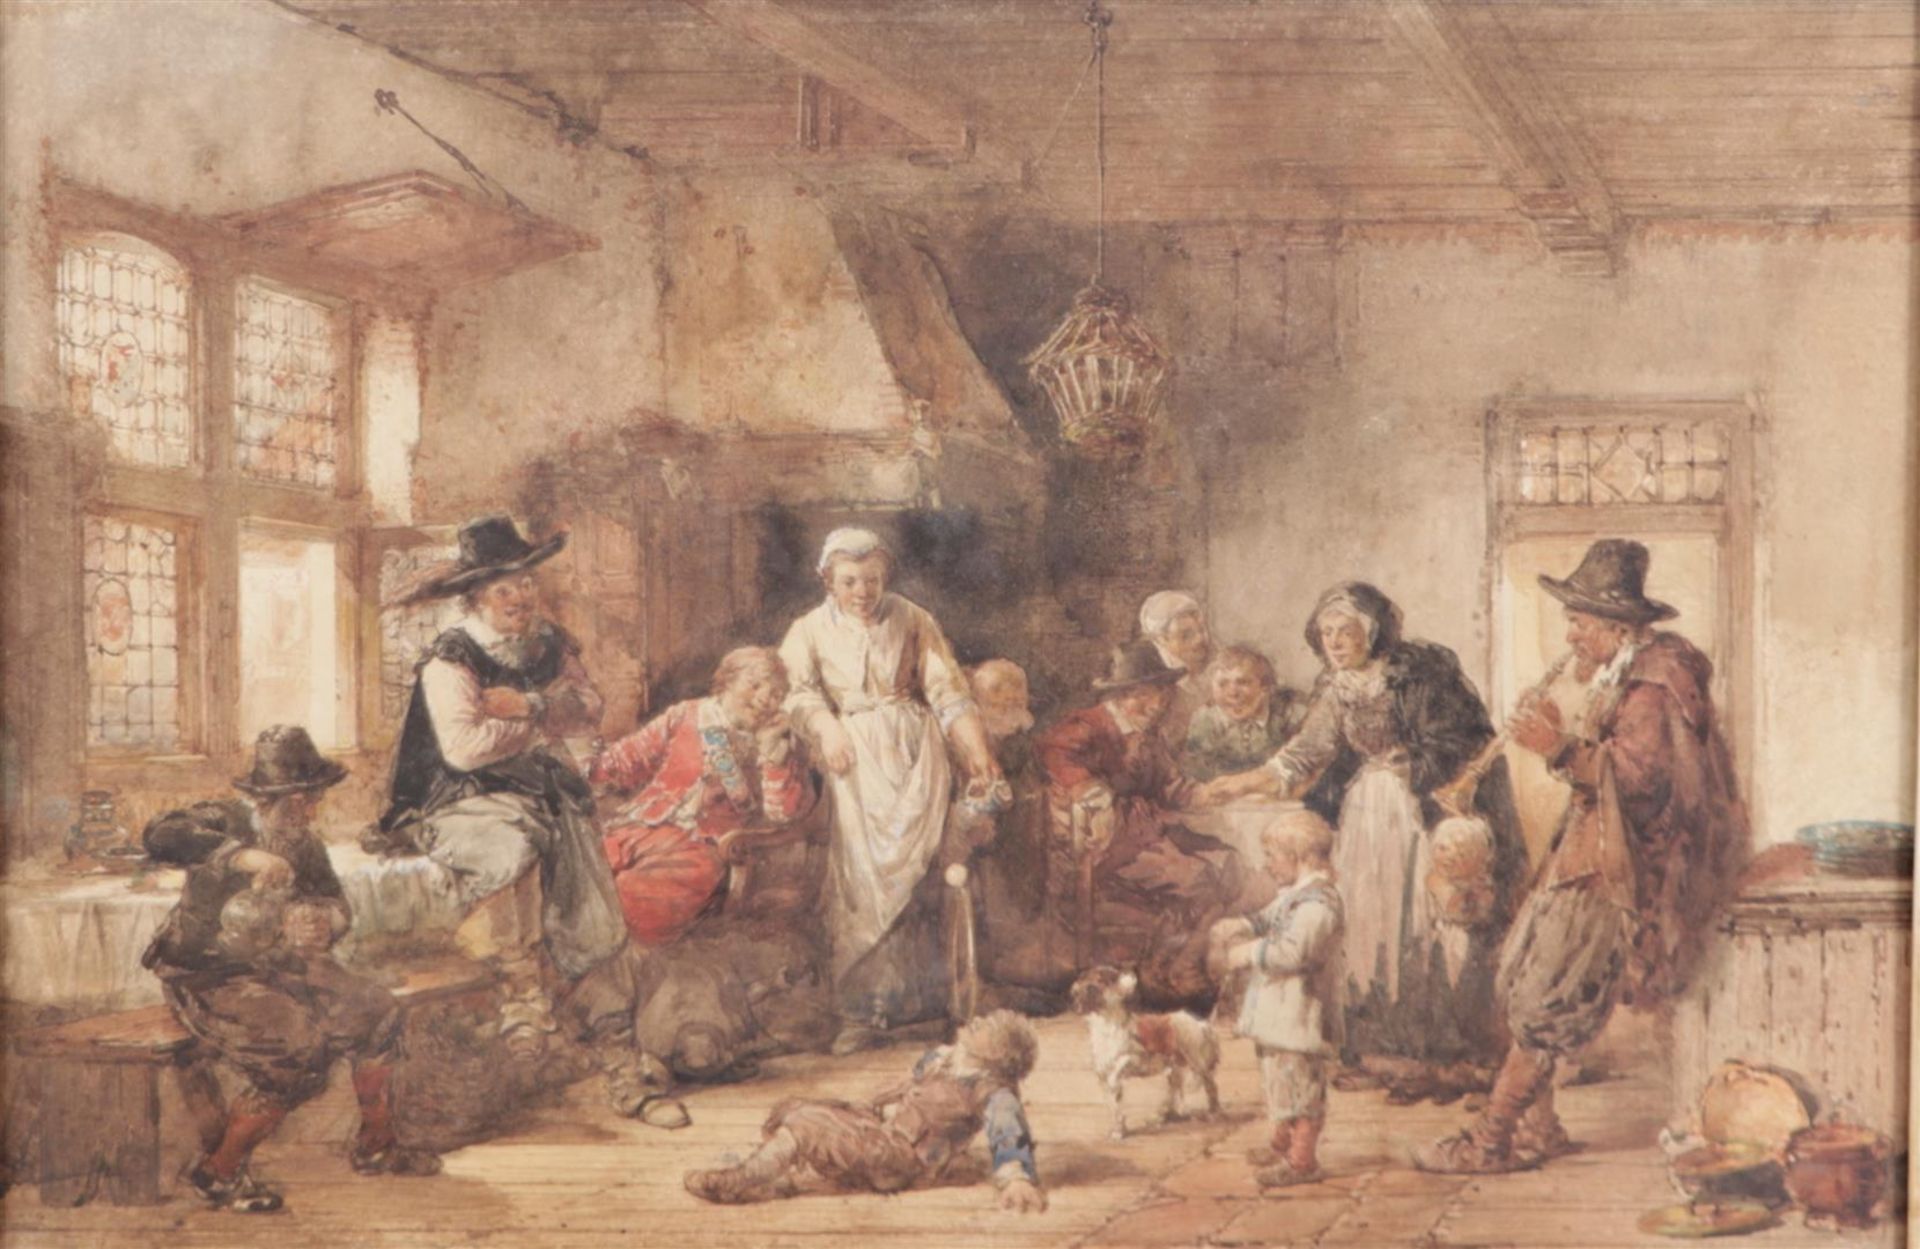 H.F.C. 'Herman'ten Kate (The Hague 1821 - 1891), Soldiers in an inn, signed (bottom right), watercol